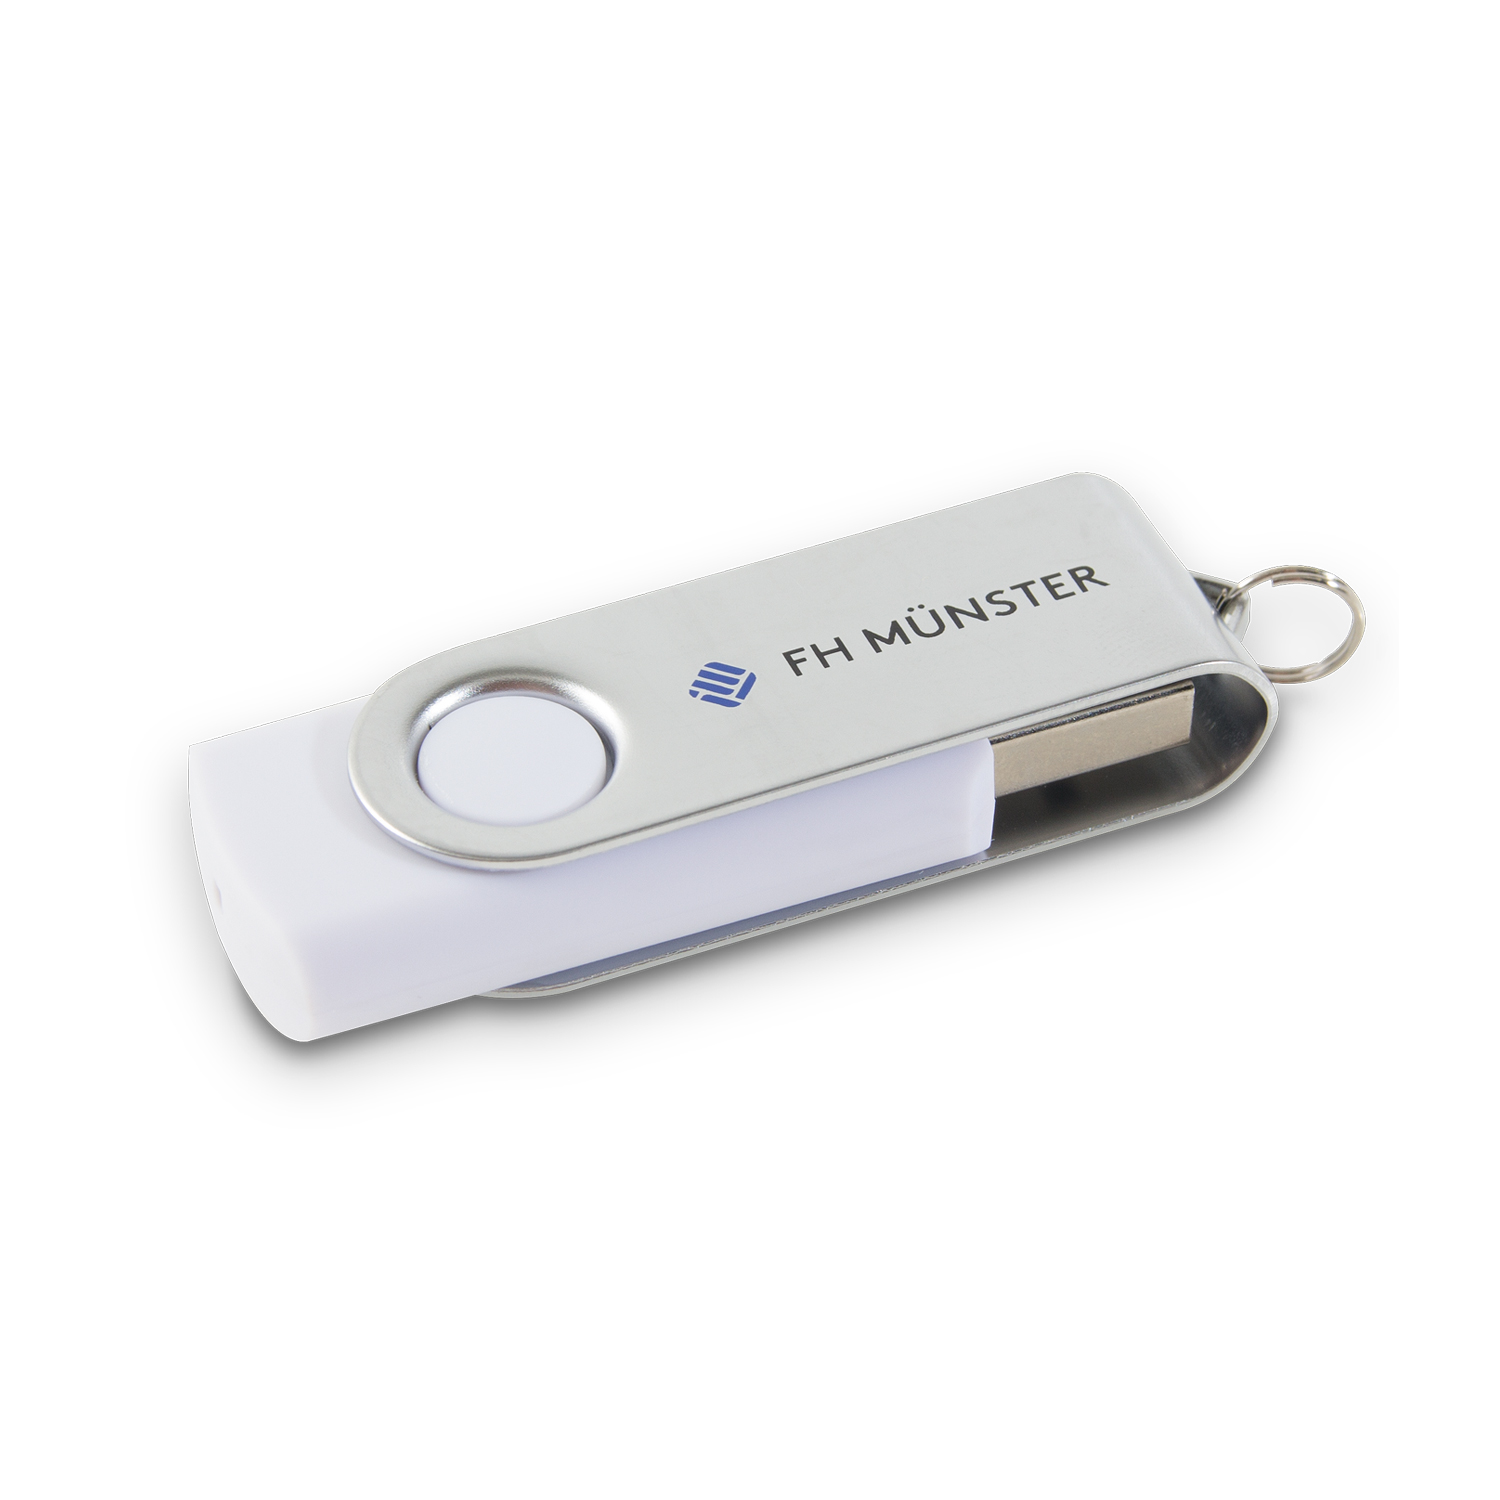 virtuel hans Styring USB-Stick, 8GB | Accessoires | Campusstore FH Münster